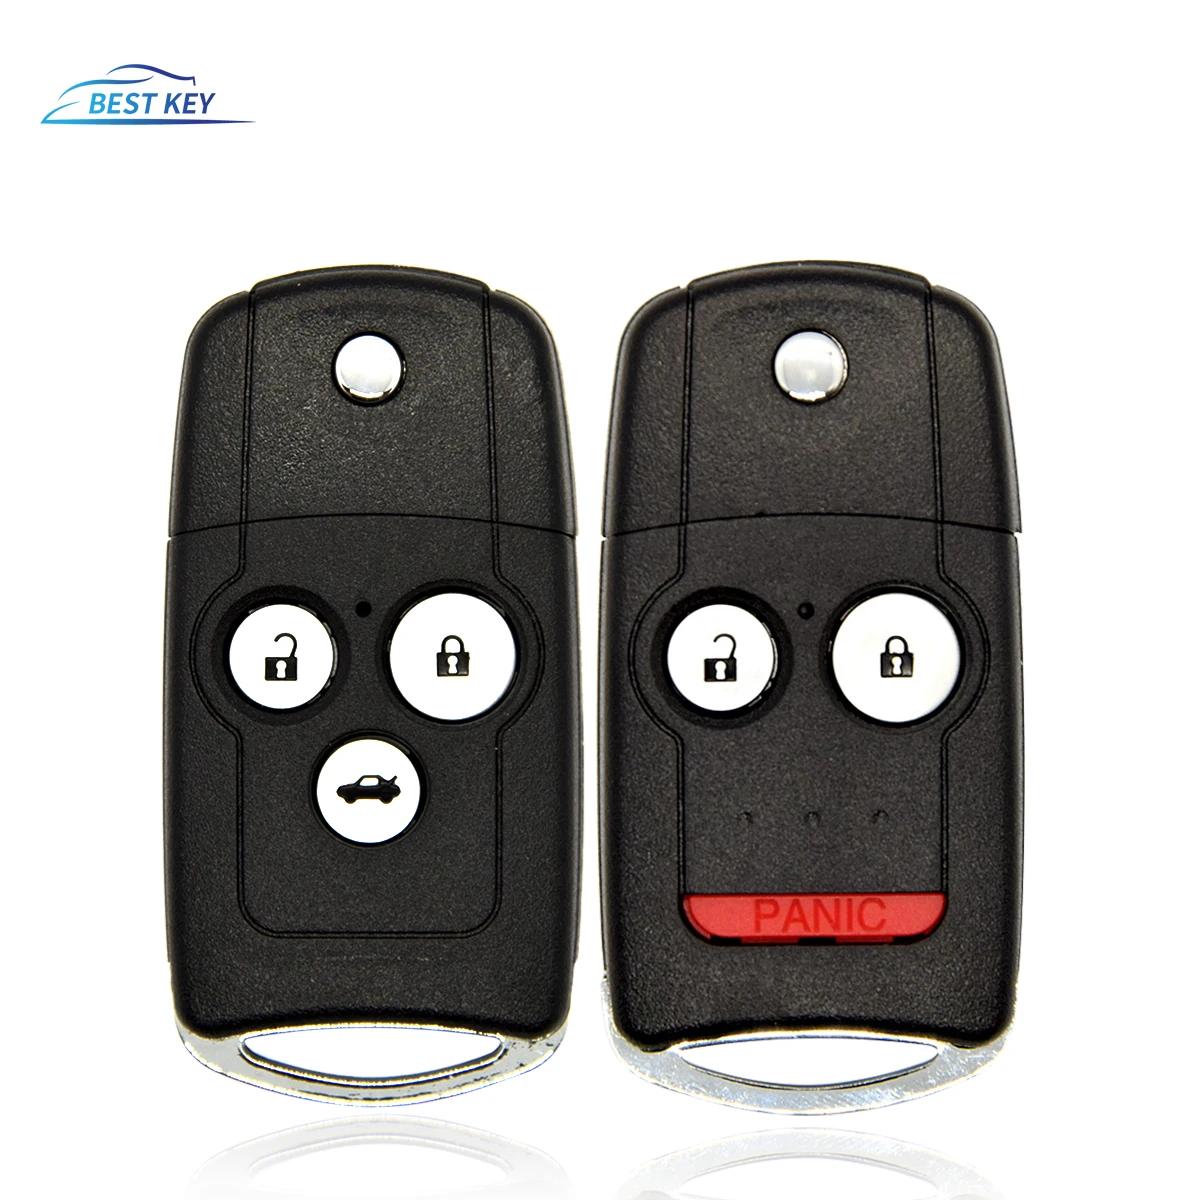 BEST KEY For Honda Acura Civic Accord Jazz CRV HRV 2009--2014 Remote Flip Car Key Fob Shell Case 3/4 Buttons  Accord 2008-2012 best key 2 3 4 buttons flip car remote key shell fob fit for honda acura civic accord jazz crv hrv key case housing replacement